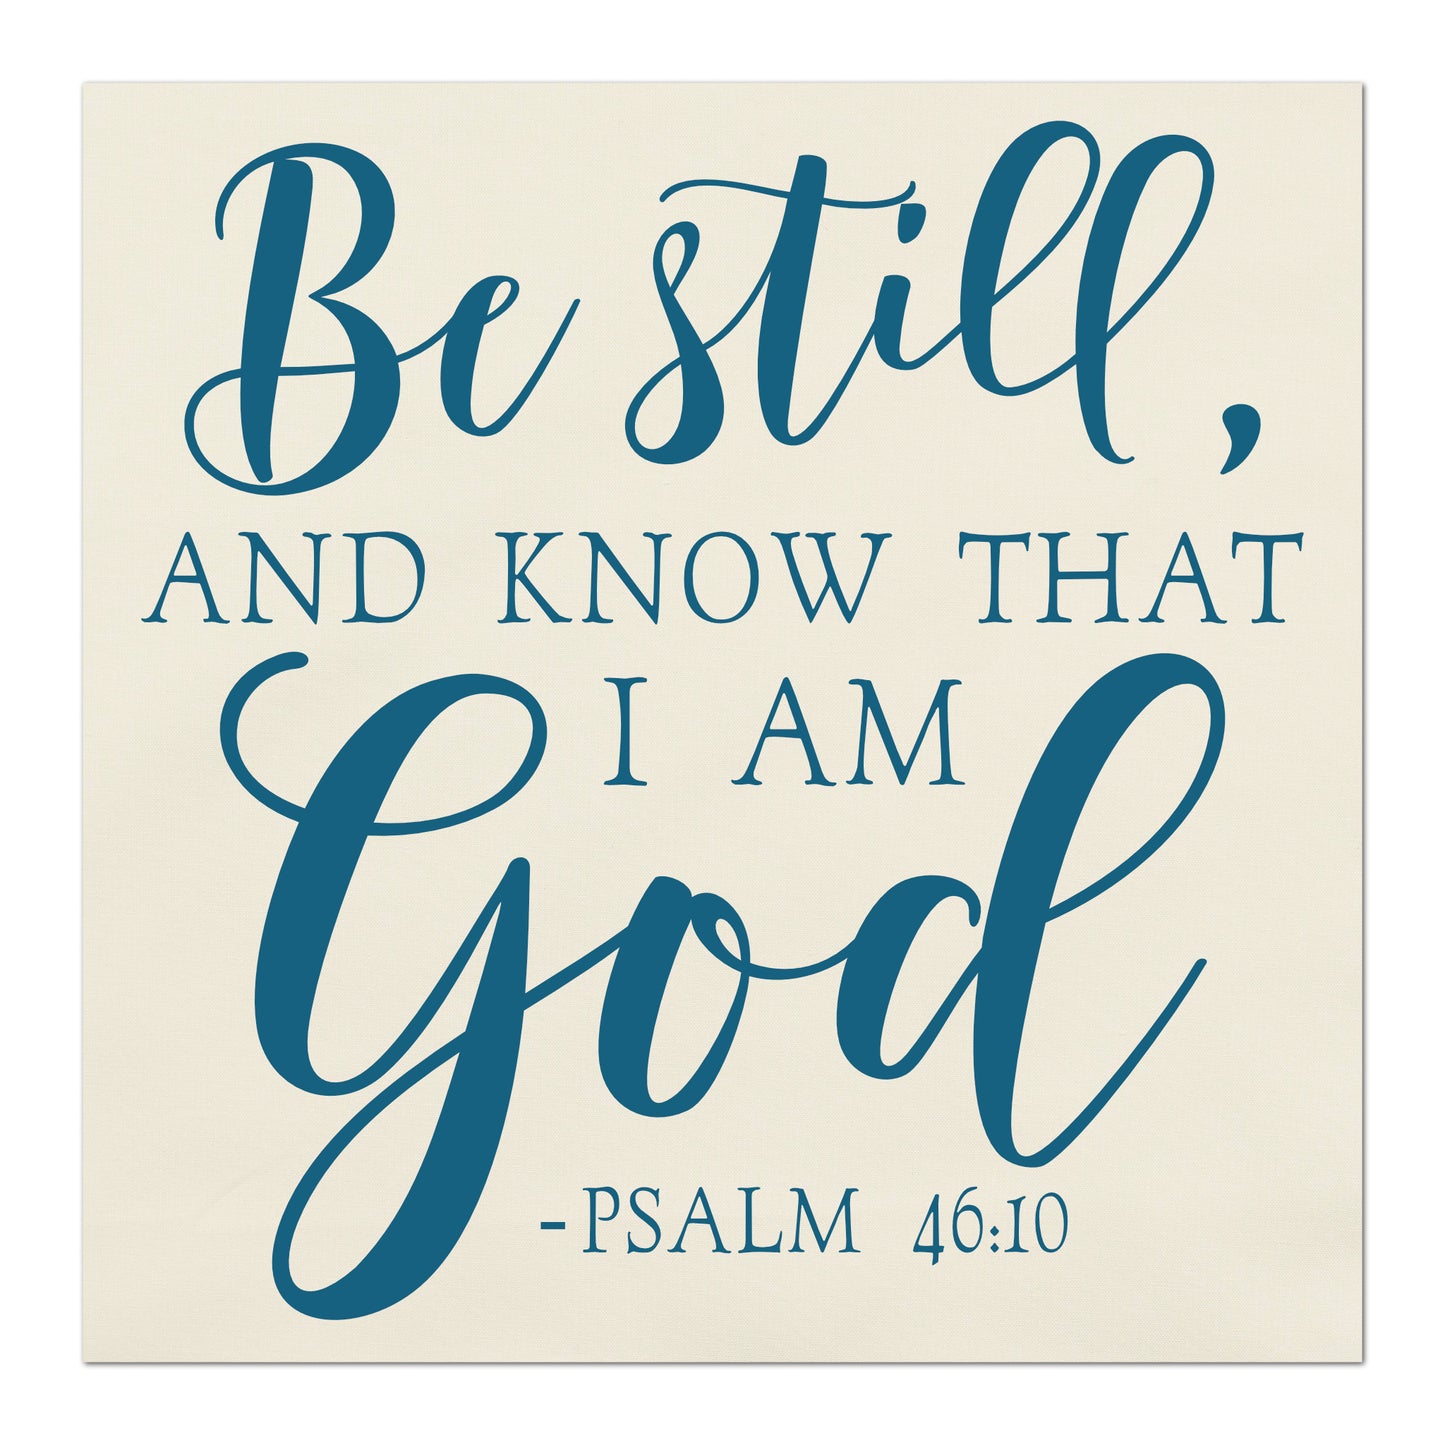 Be still and know that I am God - Psalm 46:10 - Fabric Panel Print, Quilt Block, Large Print Fabric